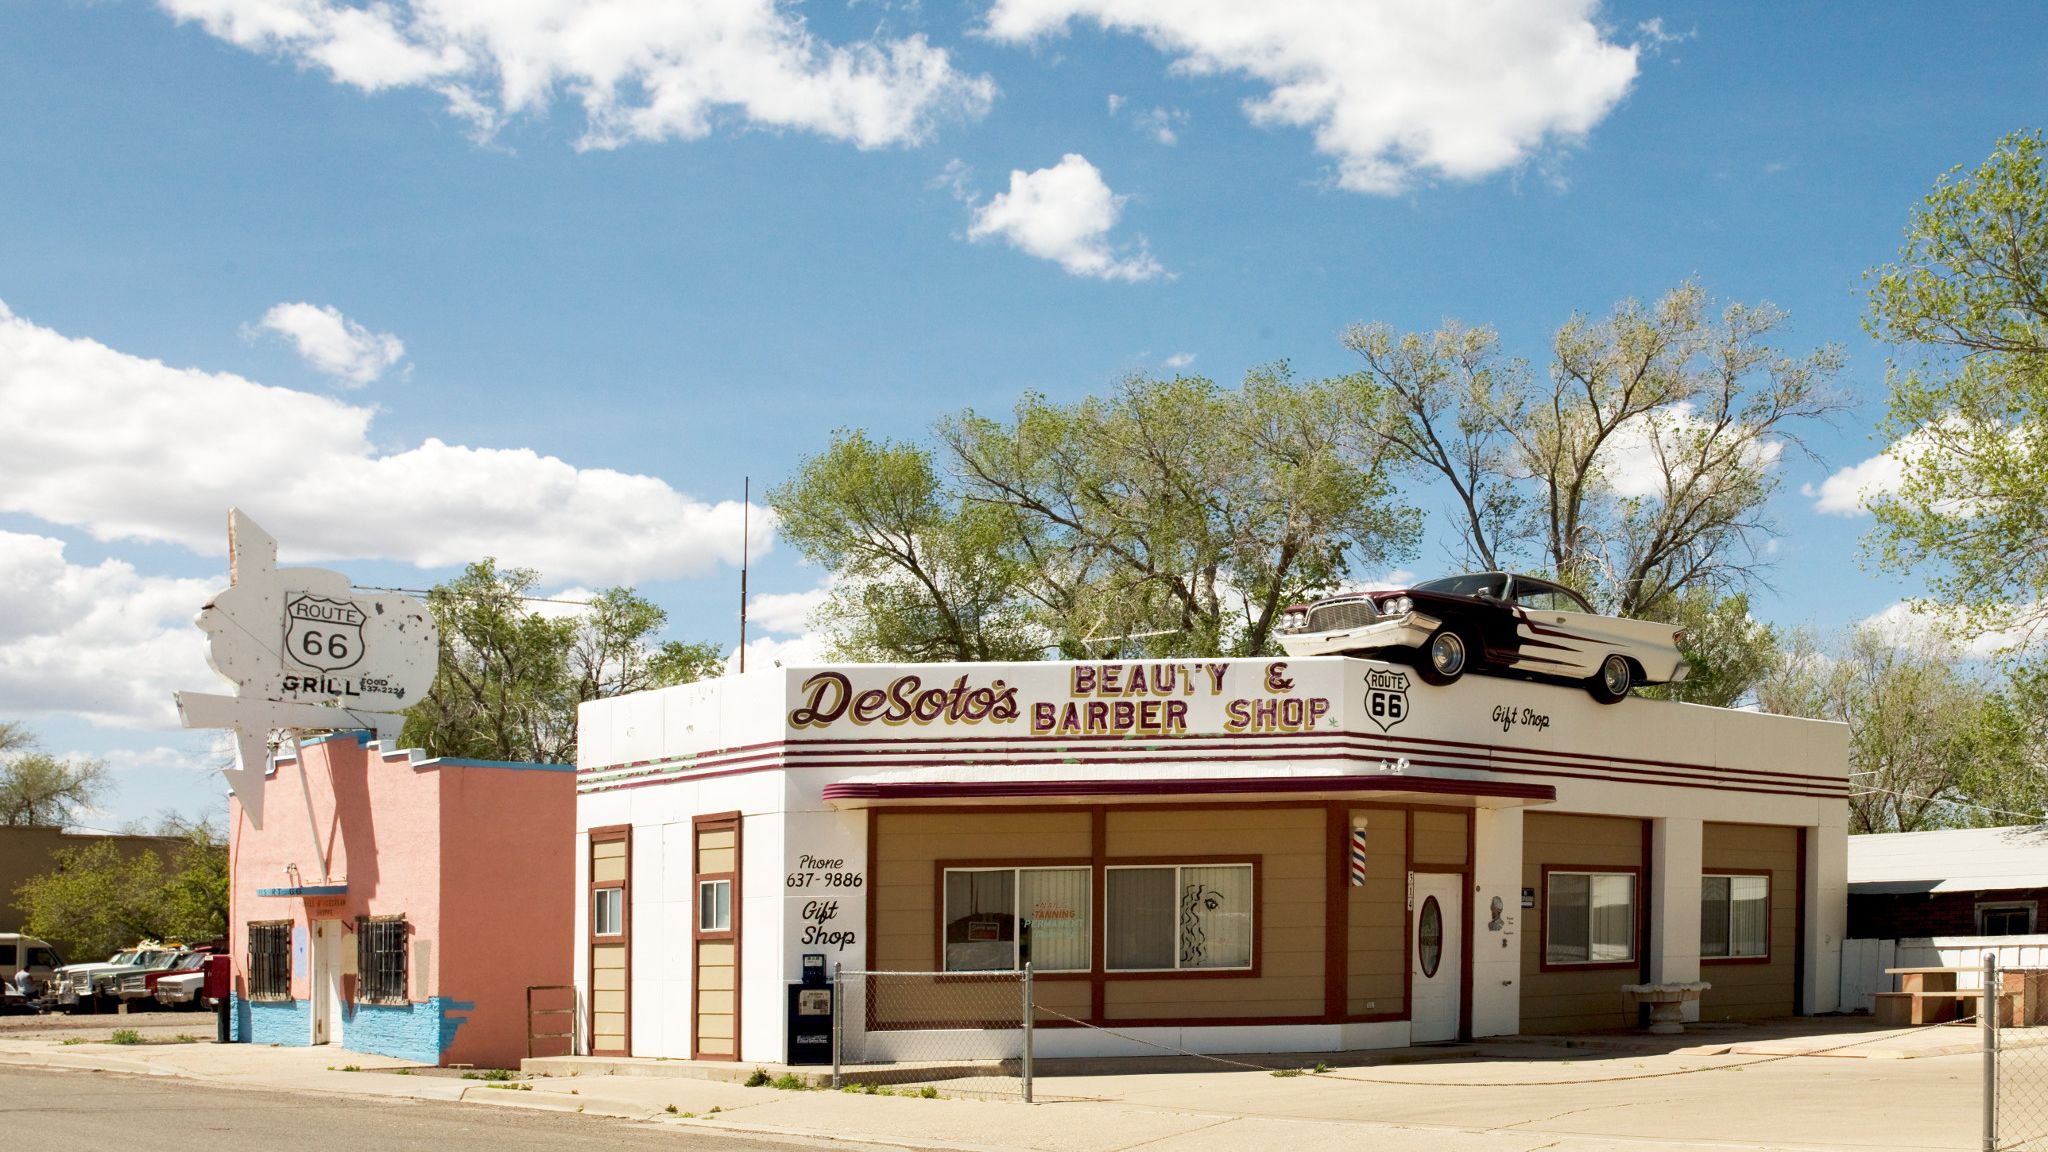 America's famed Route 66 put on list of 11 endangered historic places, US  news